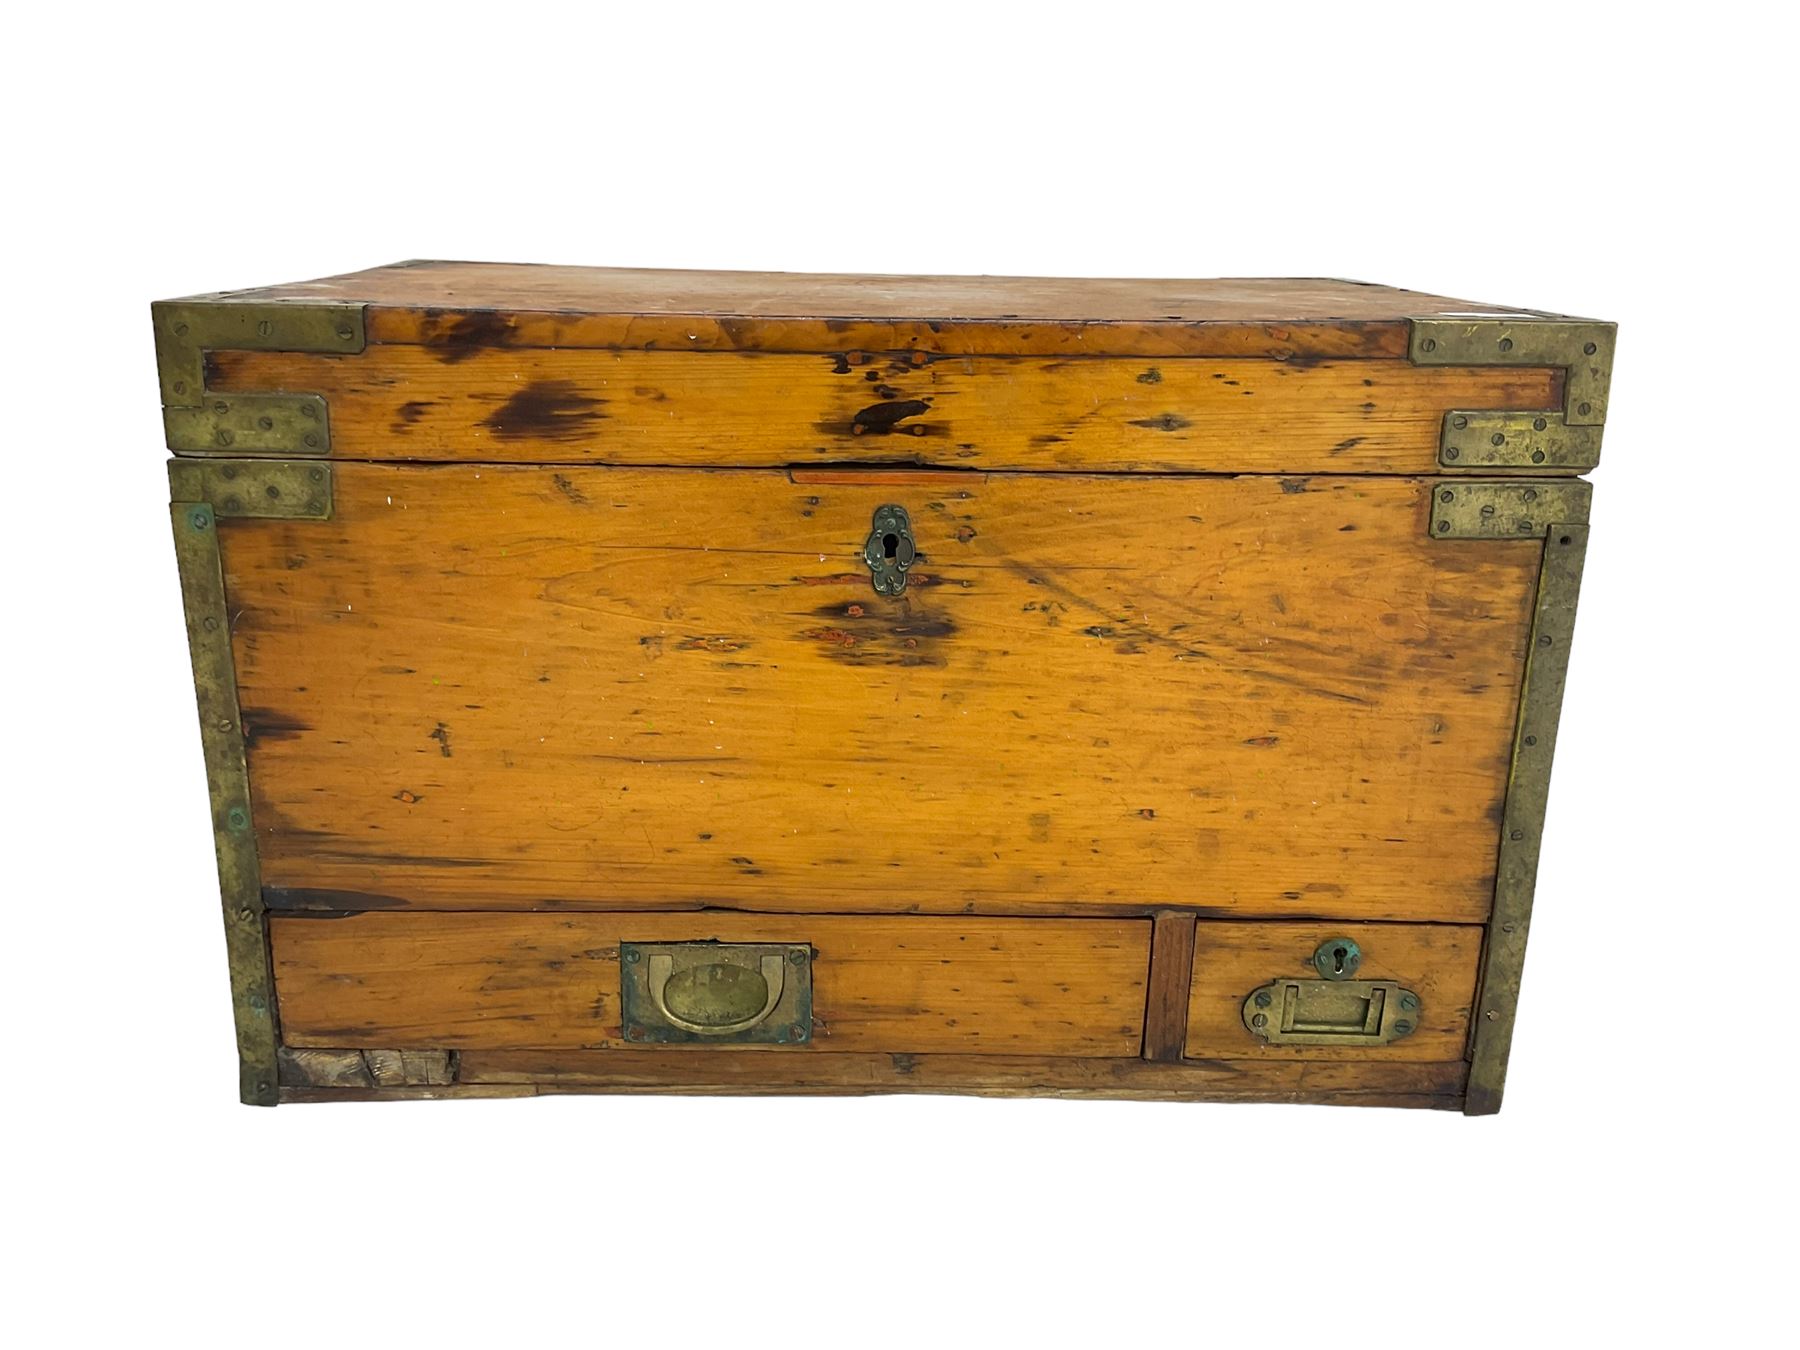 Early 20th century waxed pine travelling trunk or chest